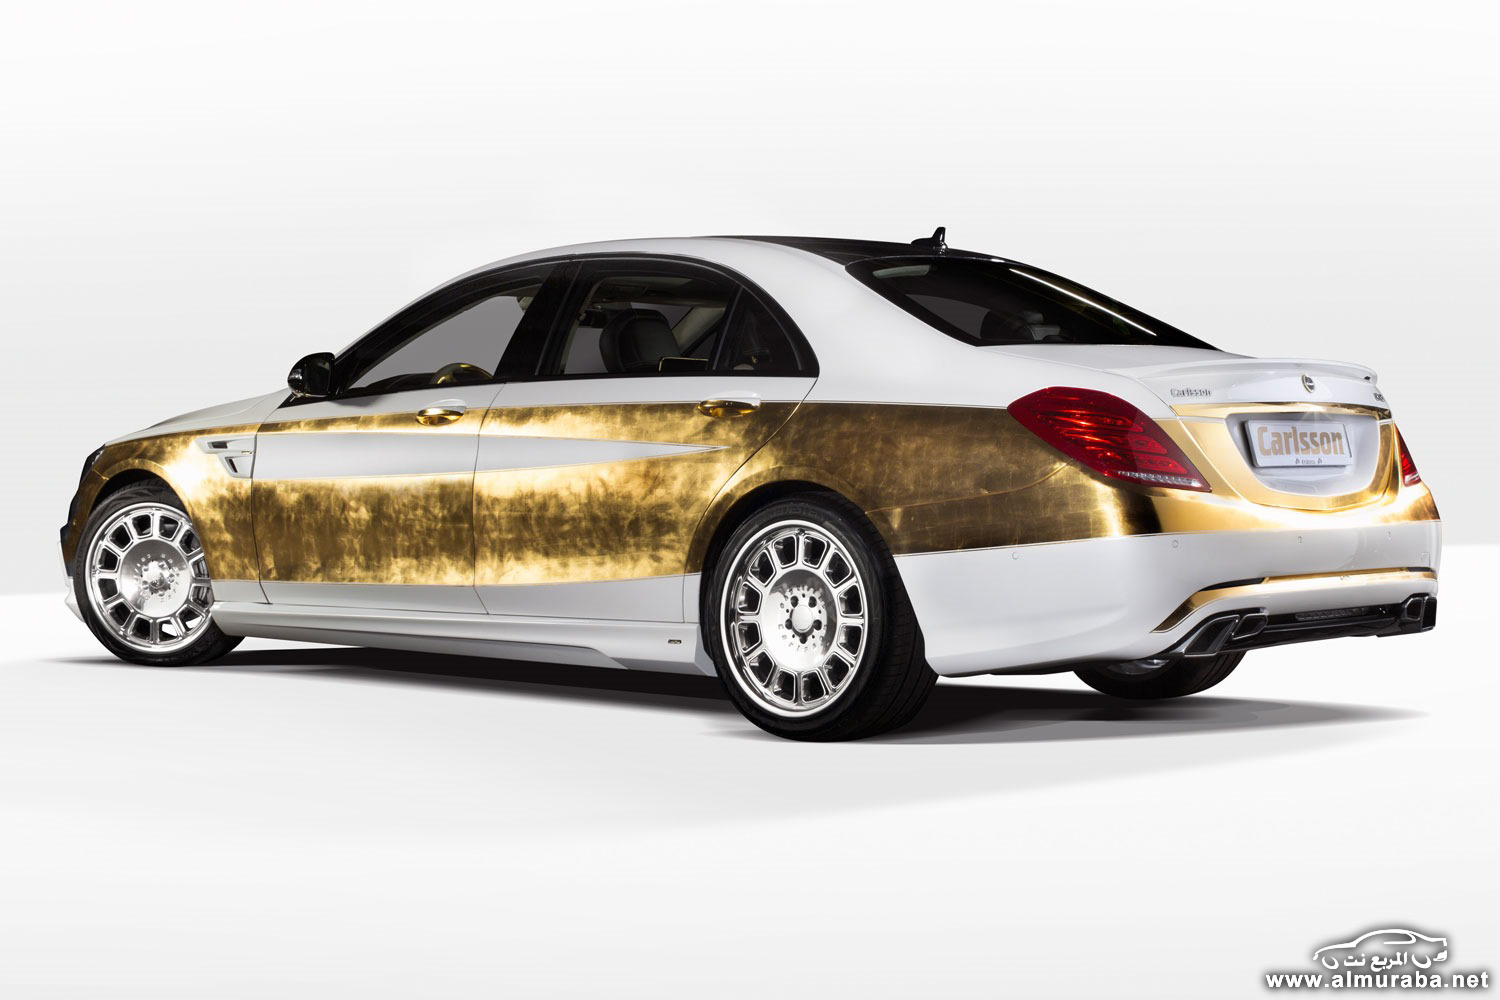 mercedes-s-class-gets-trimmed-in-real-gold-by-carlsson-photo-gallery_2